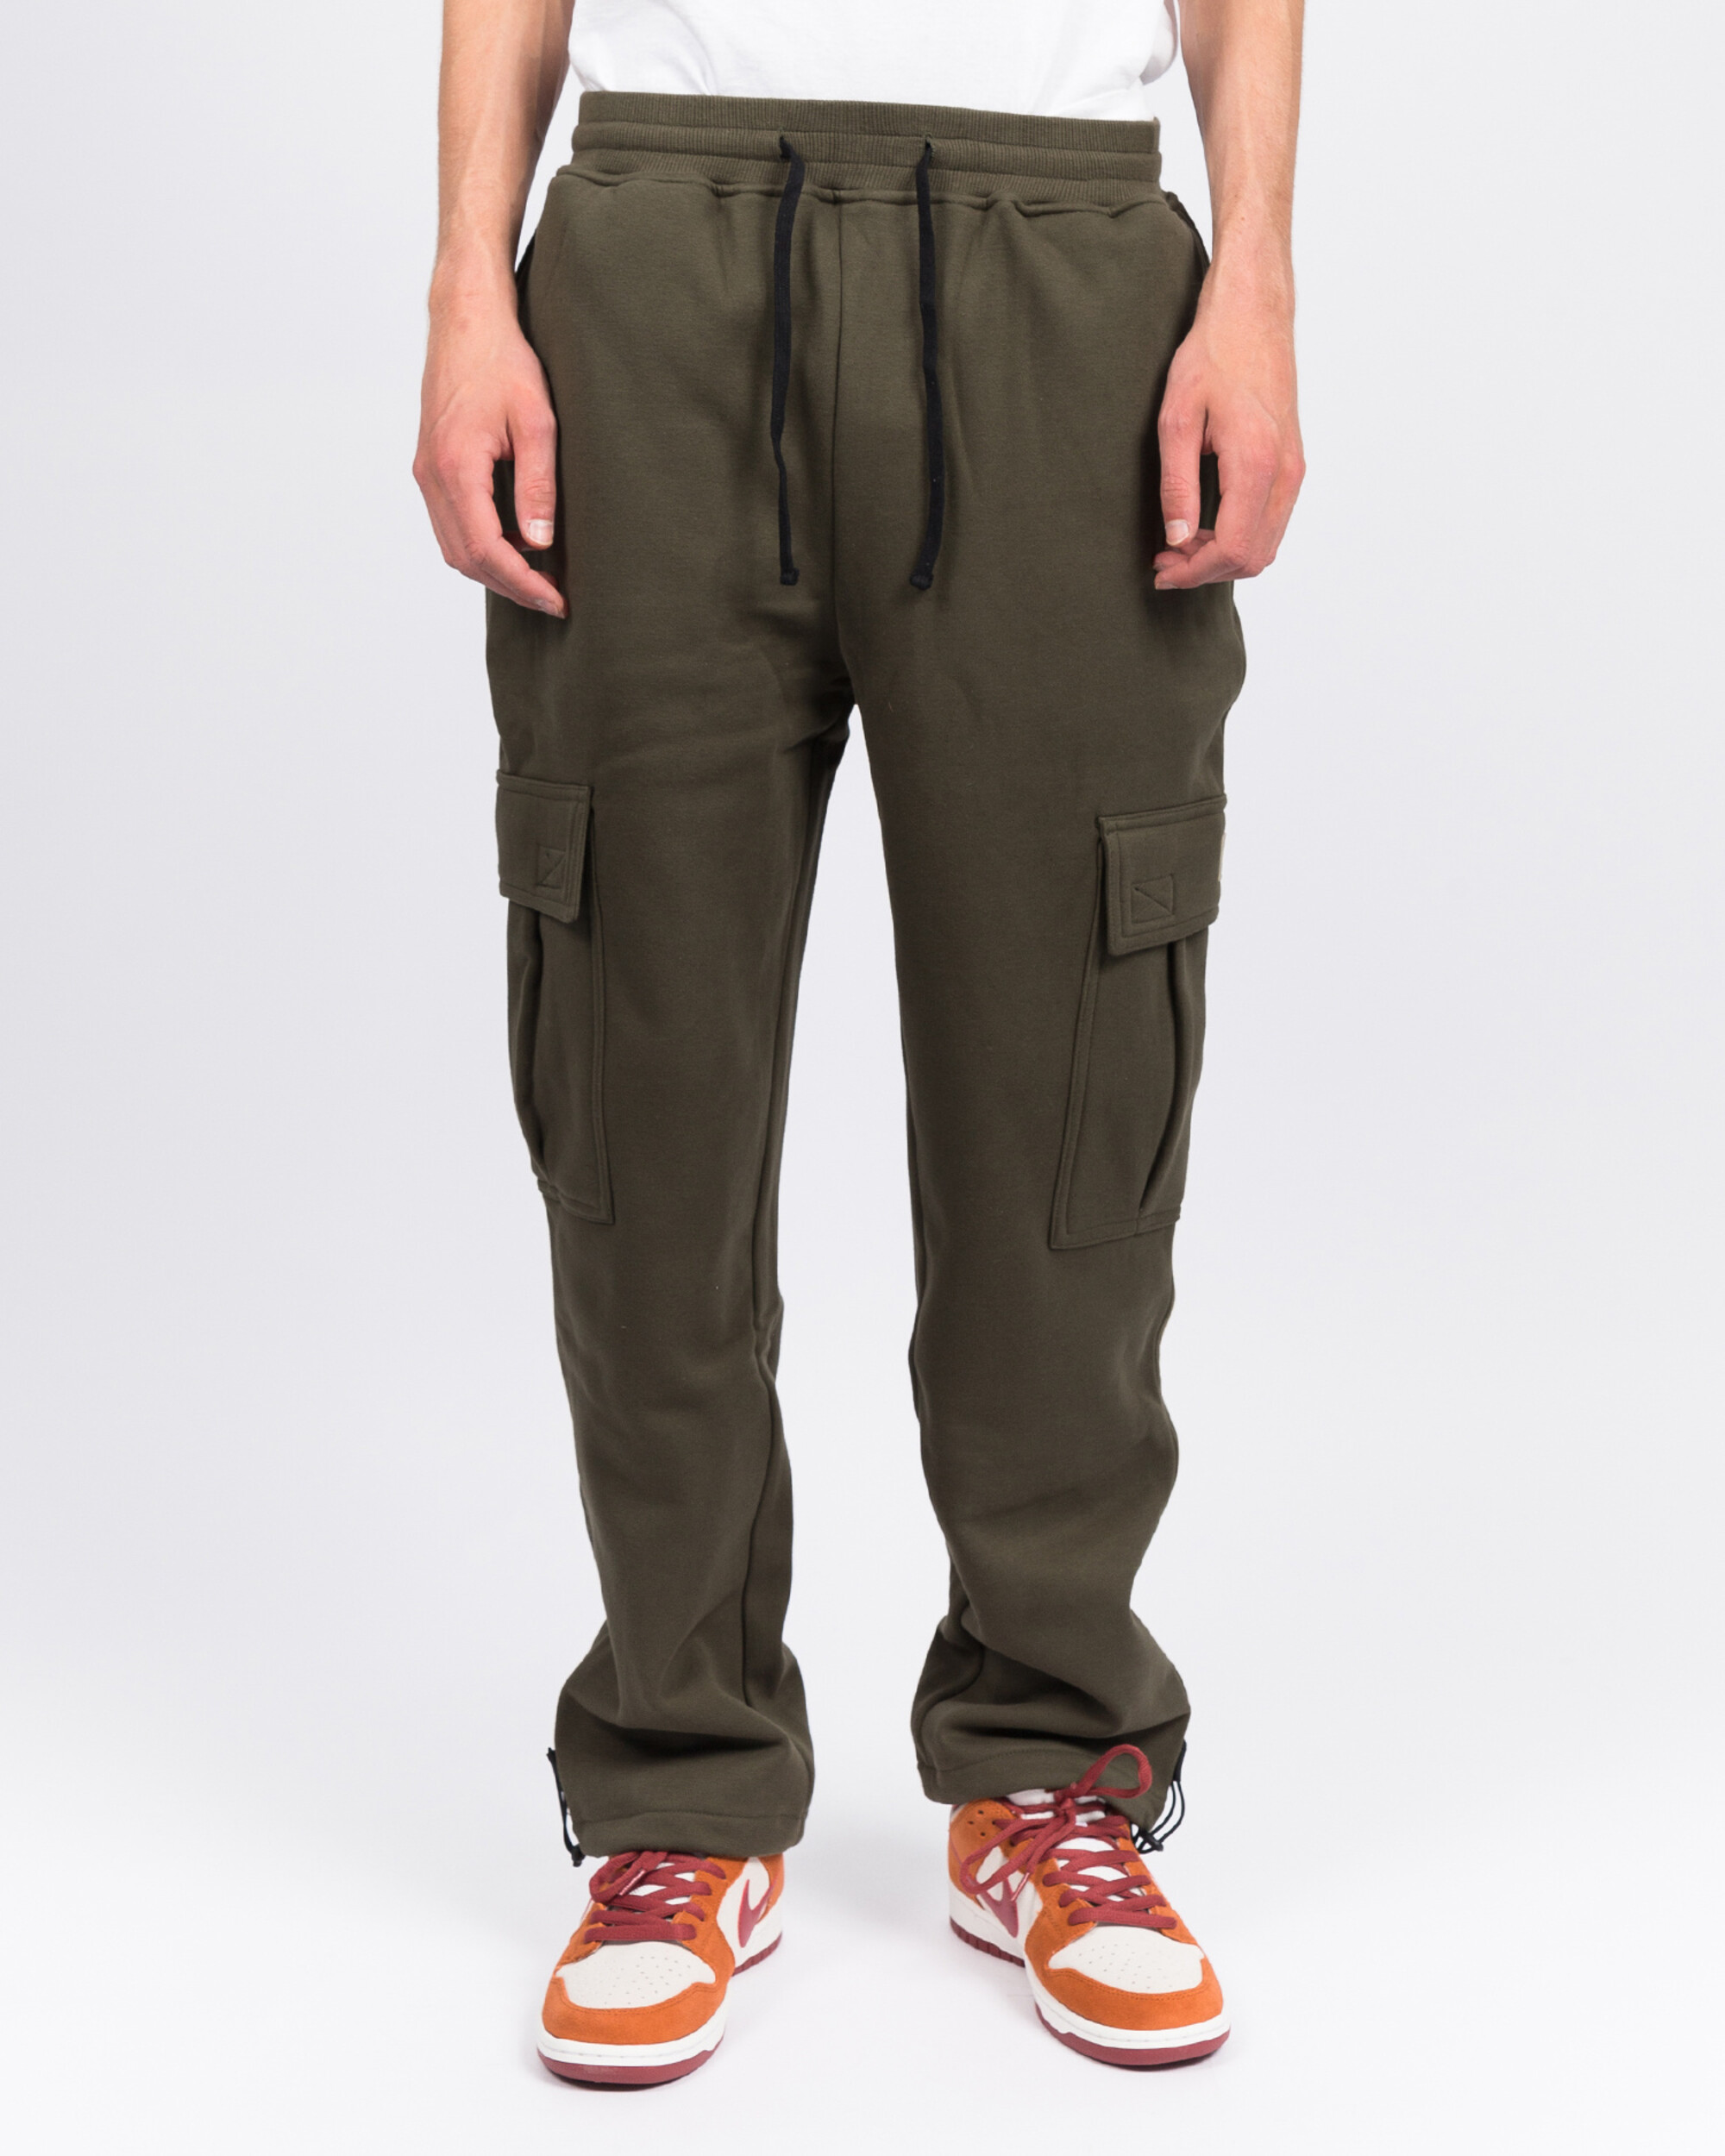 Dime Cargo Sweat Pant Military Green